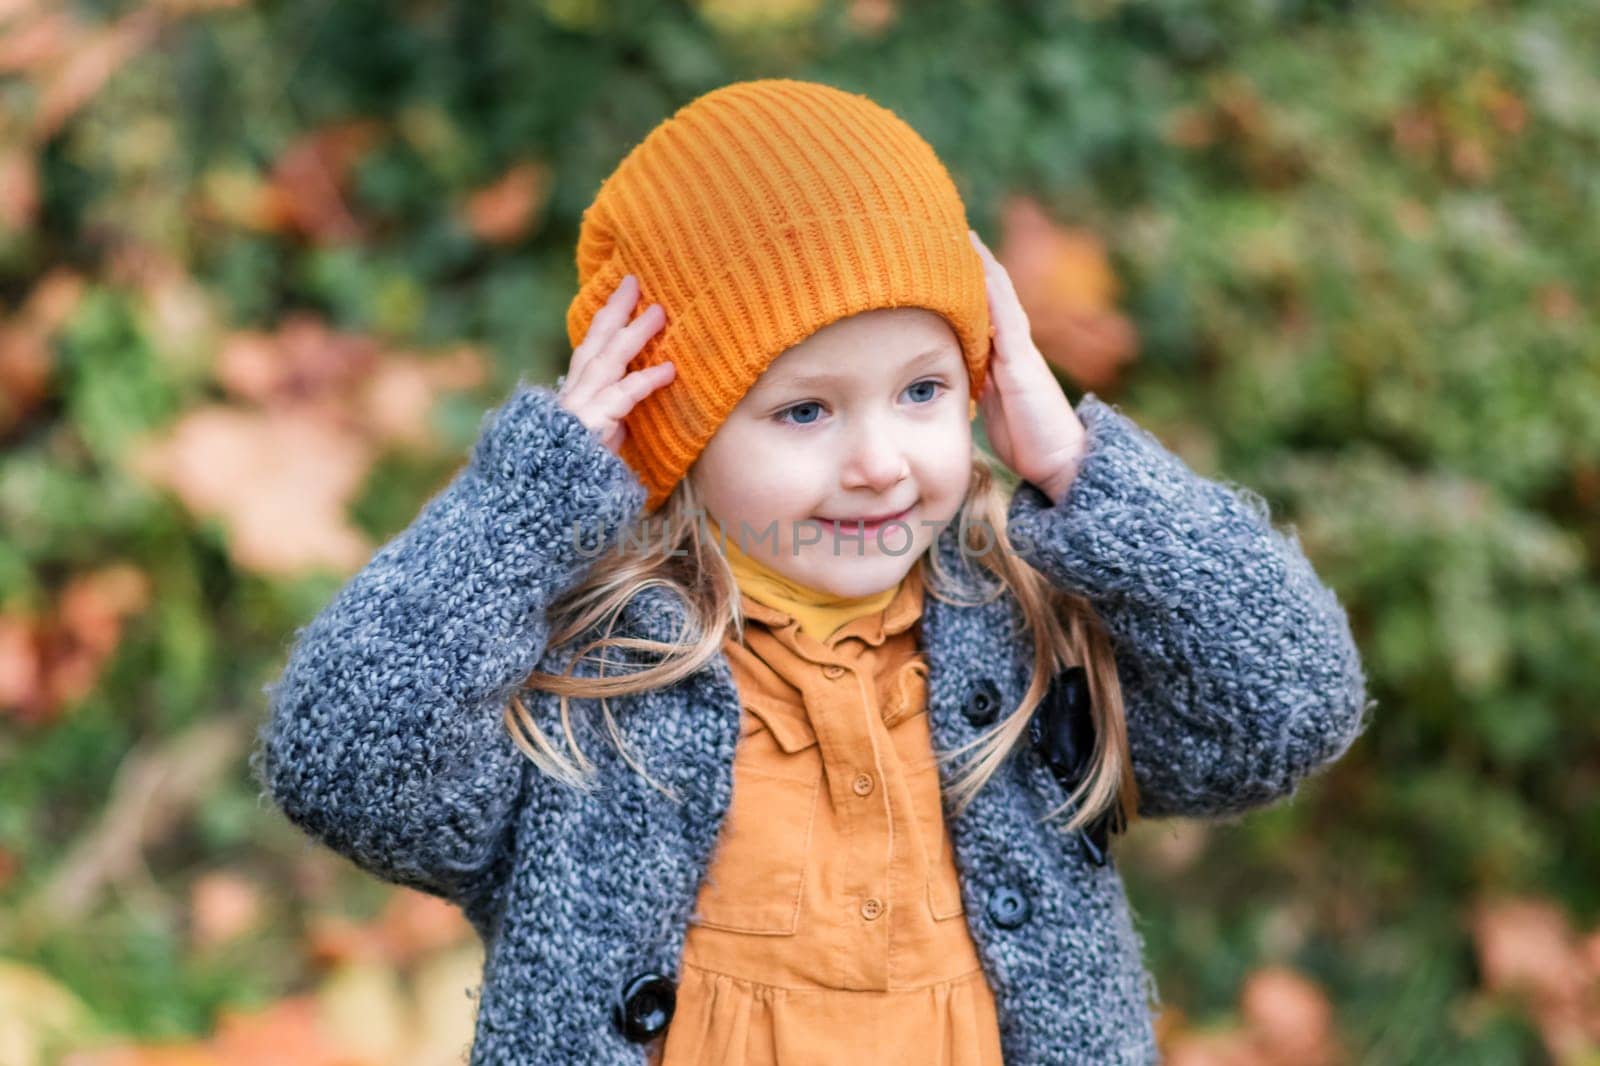 A little girl in an orange hat and a gray coat holds in a park